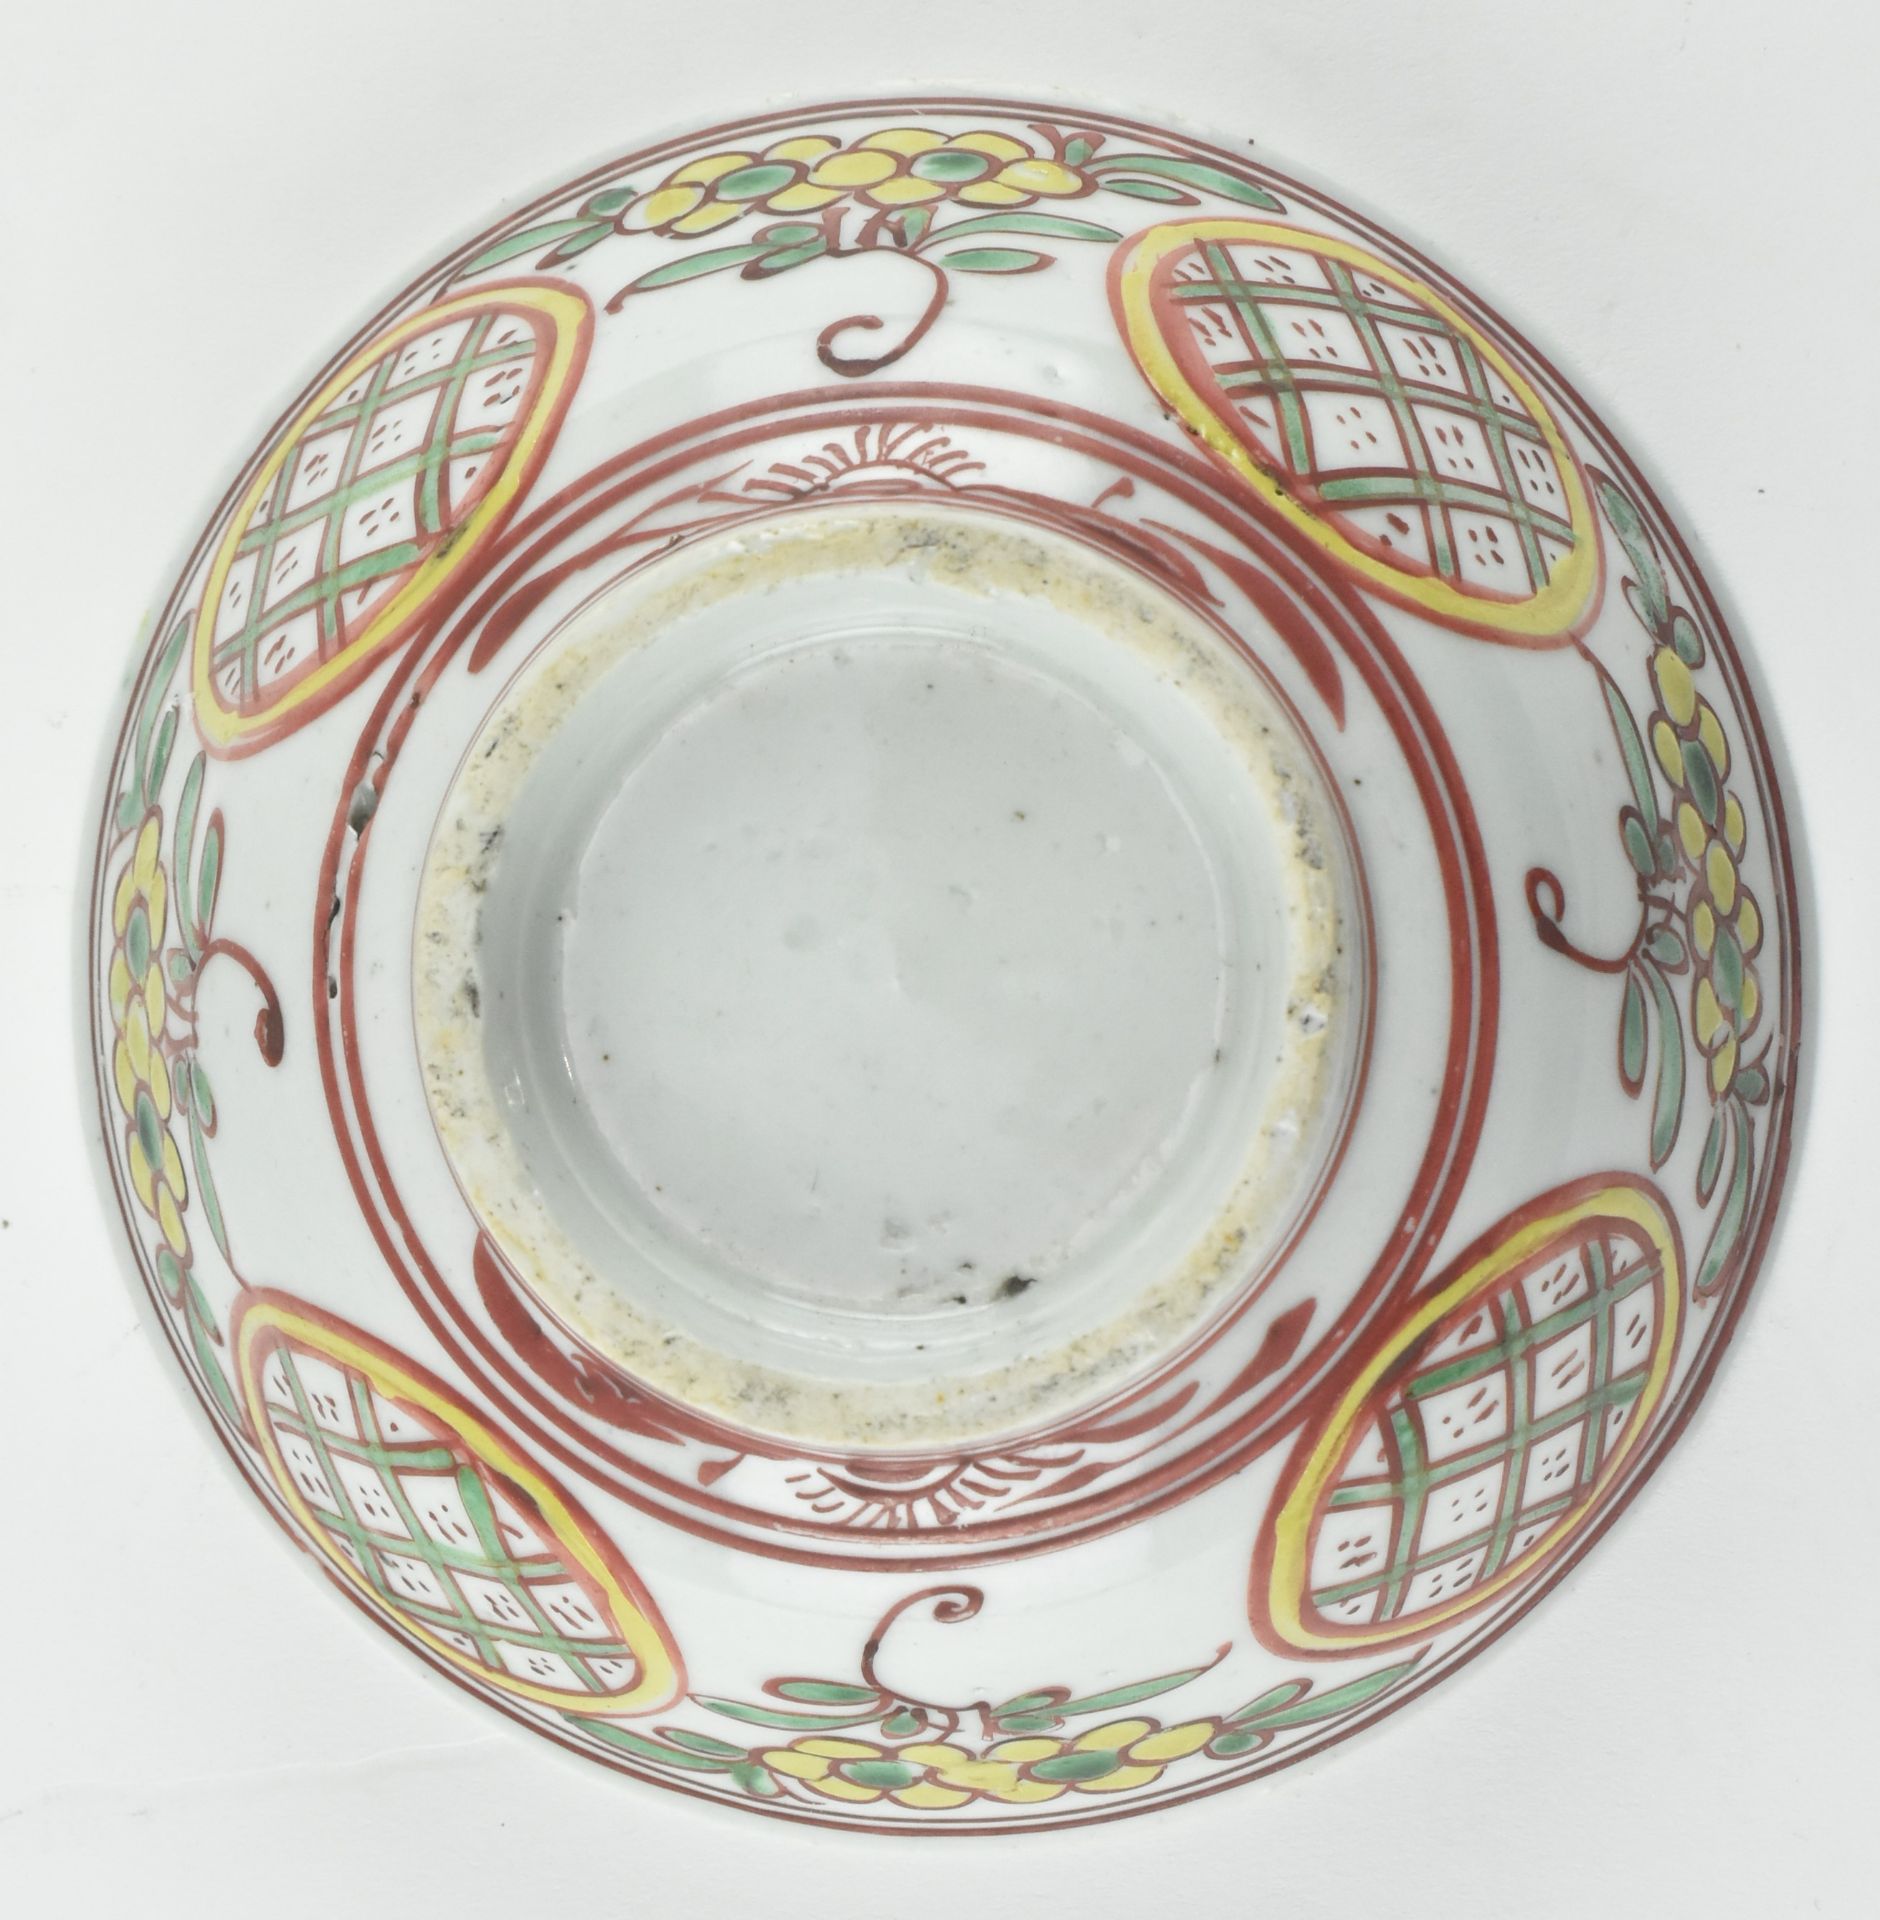 MING OR LATER TRI-COLOURED BOWL 明 红黄绿彩绘碗 - Image 5 of 6